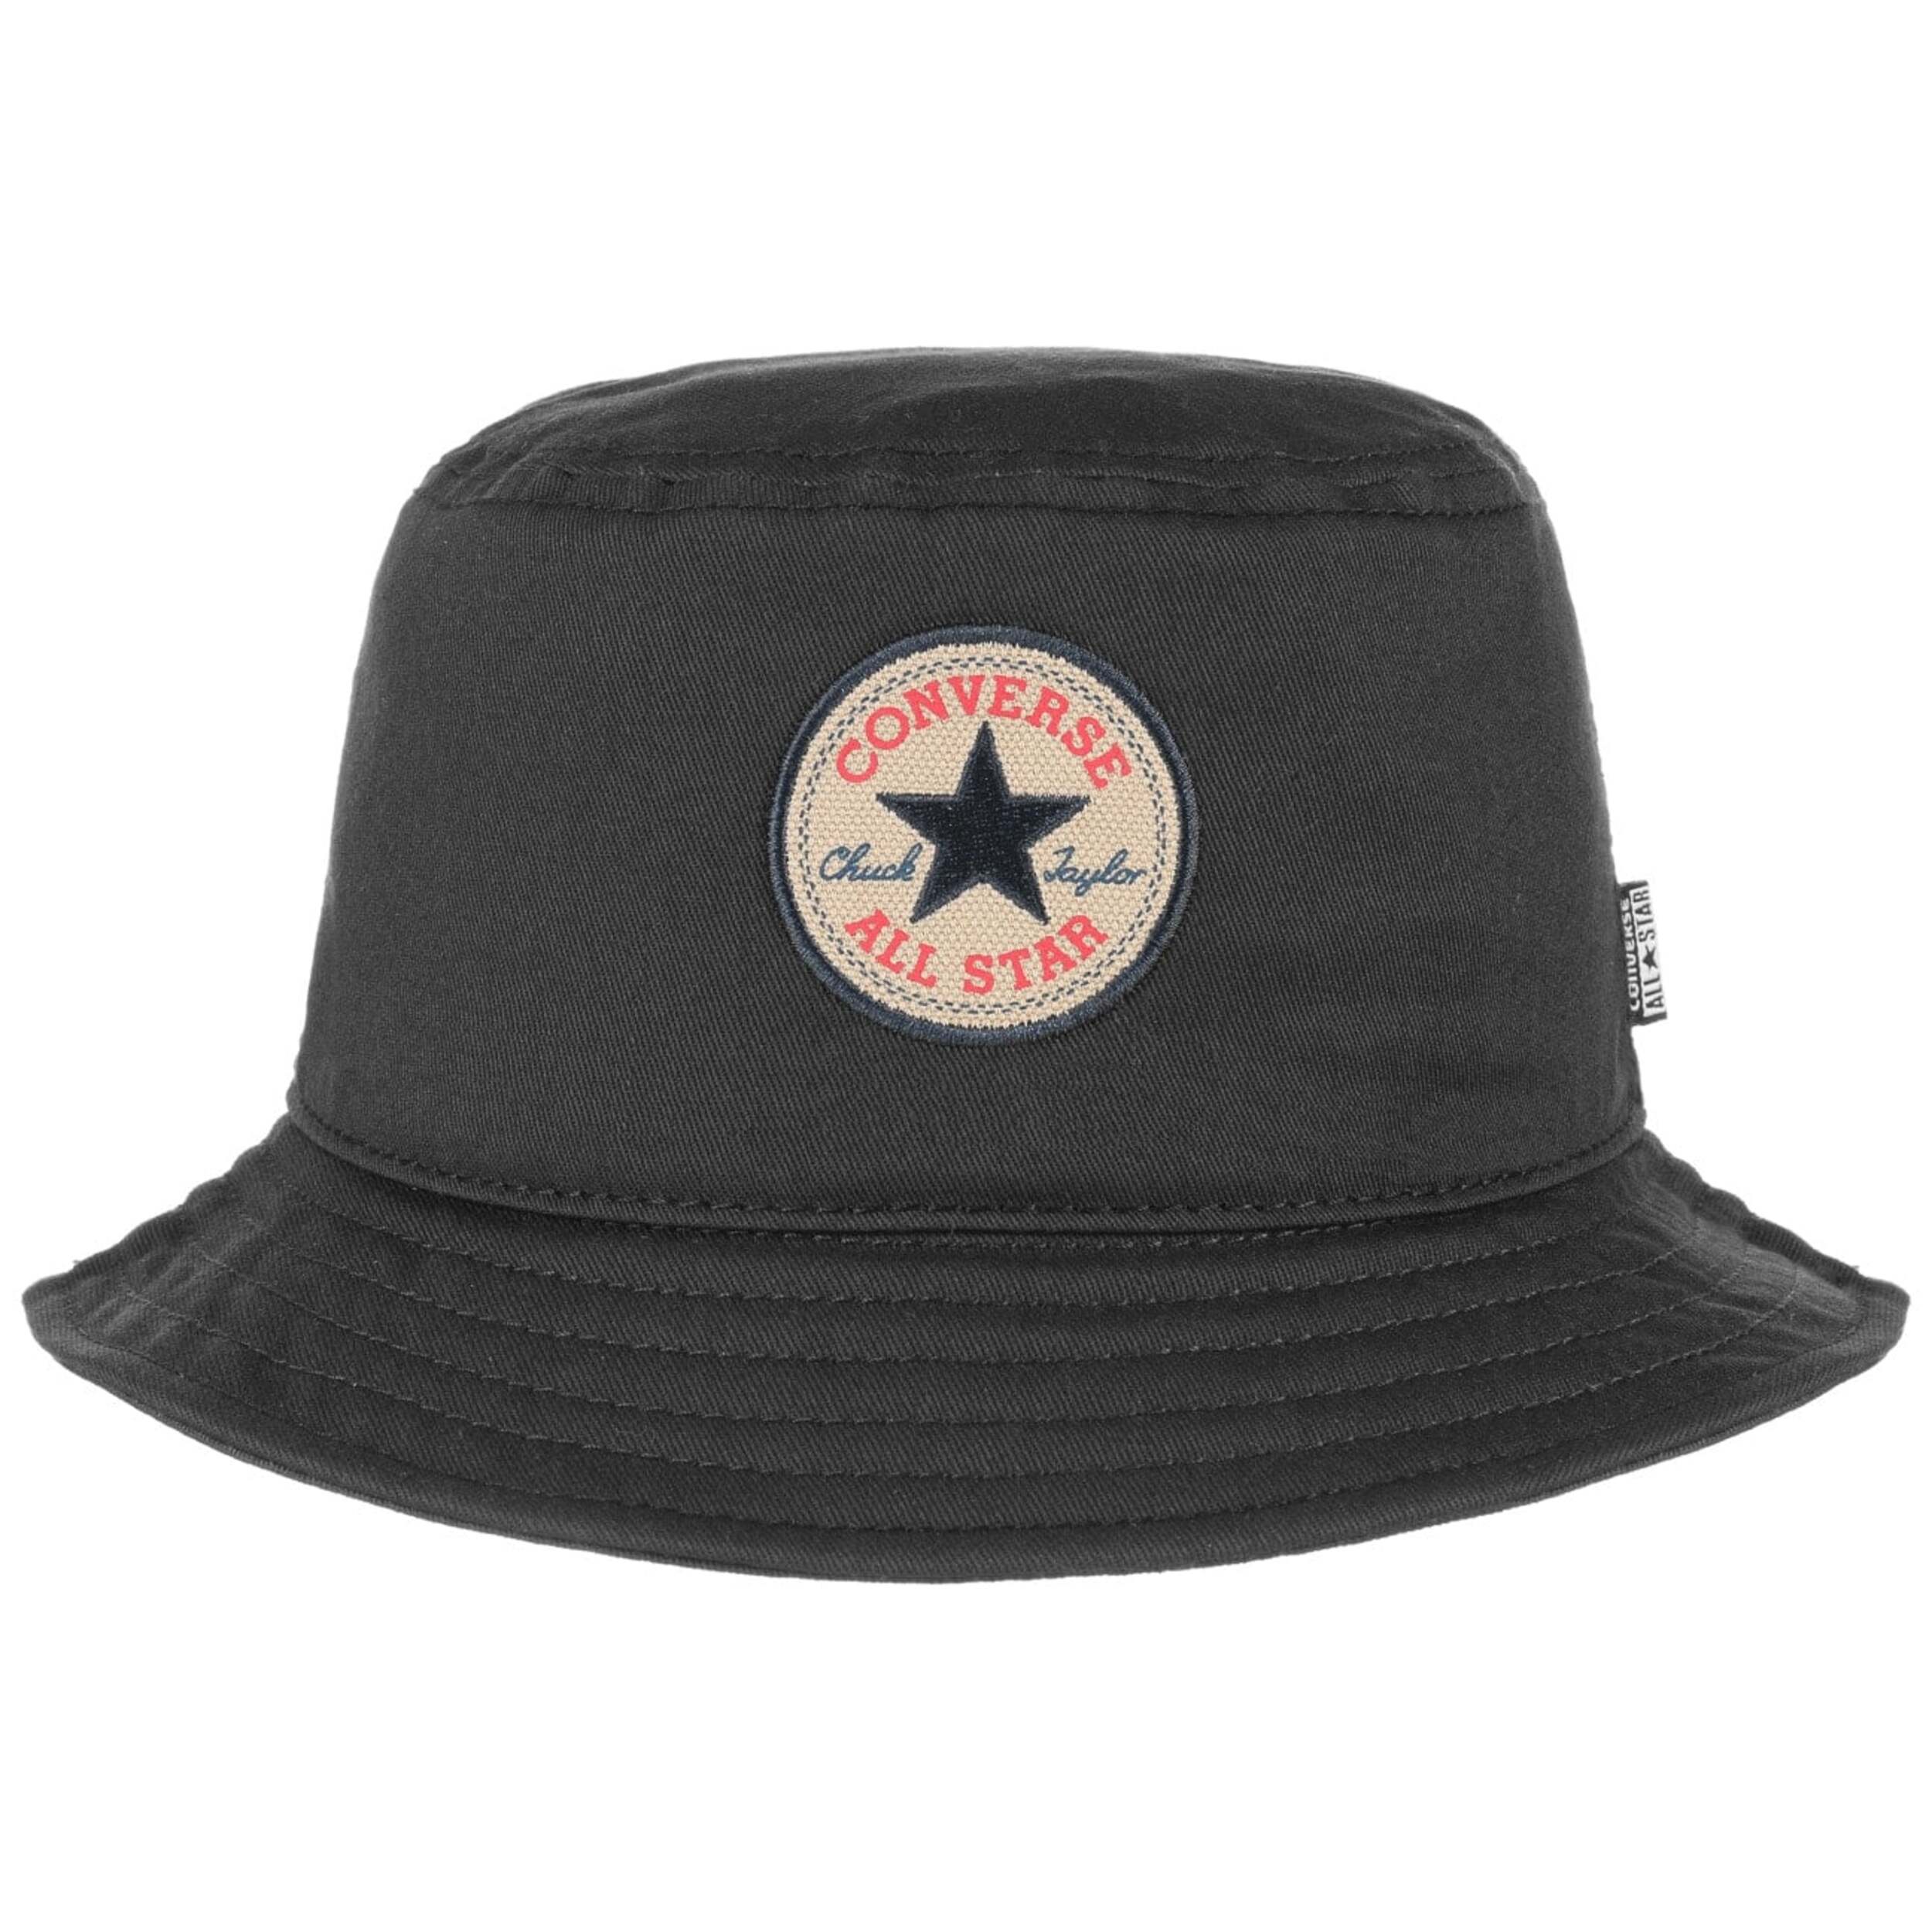 Classic Bucket Hat by Converse - 32,95 €